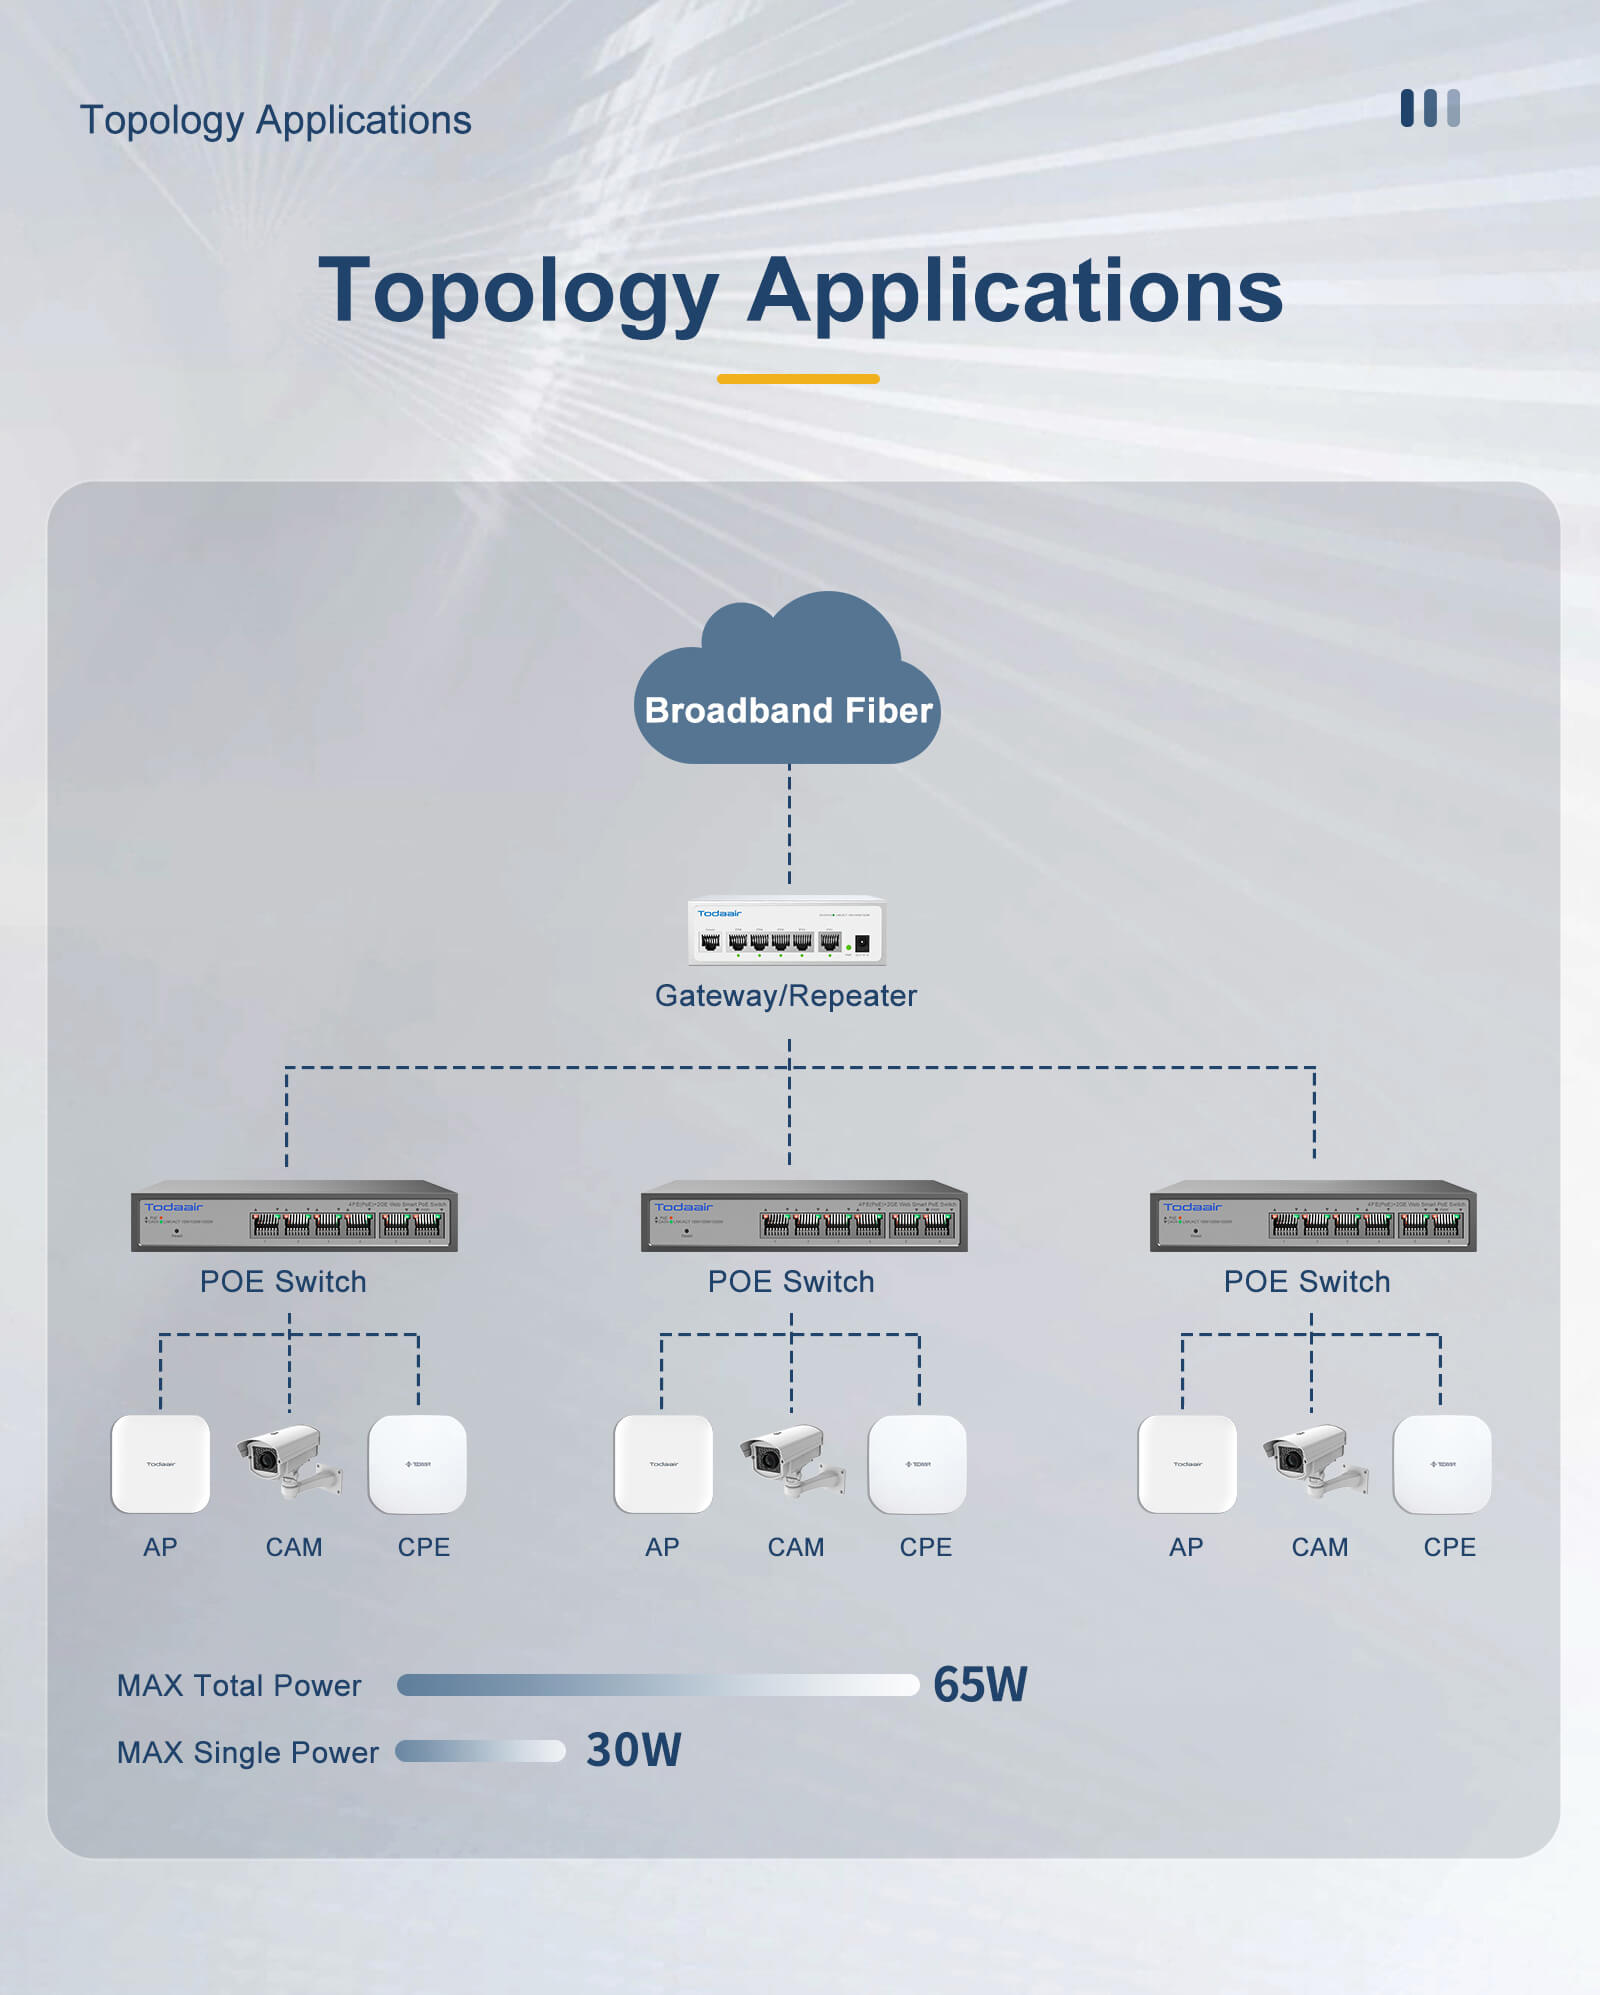 Todaair network switch topology application